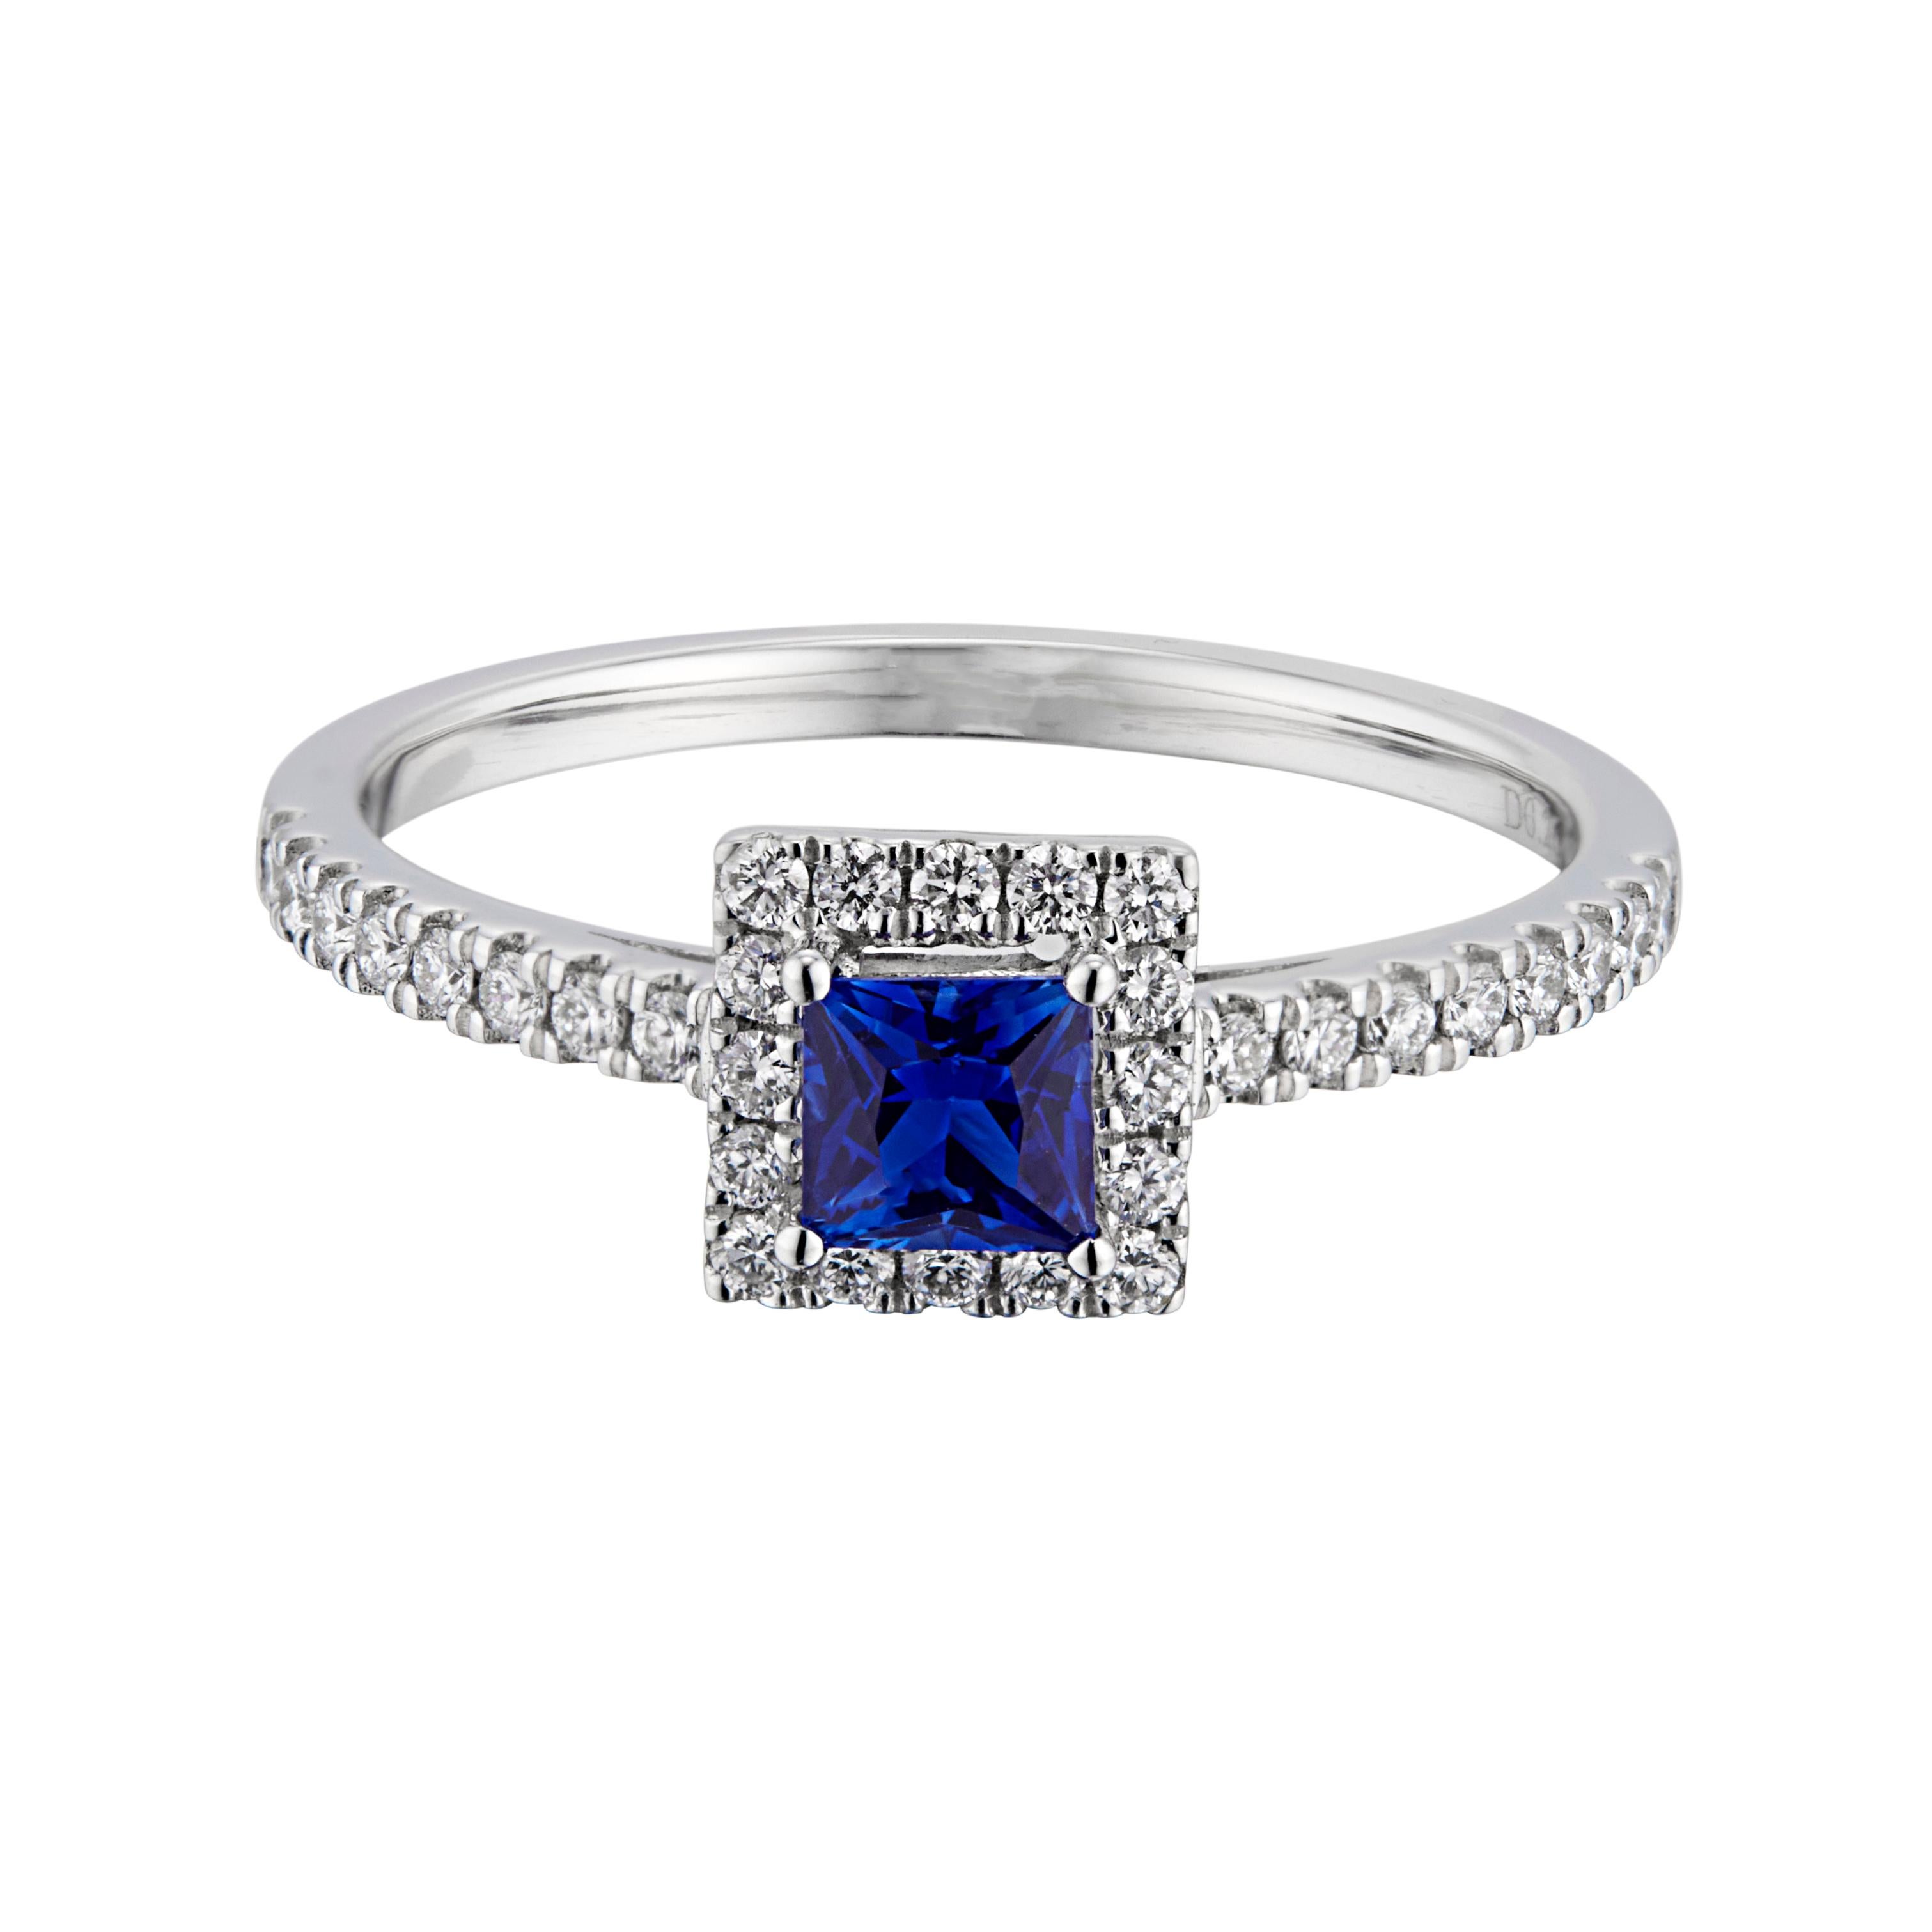 Sapphire and diamond engagement ring. Square cut center sapphire with a halo of round cut diamonds in a 14k white gold setting with diamonds along each side of the shank. 

1 blue sapphire, approx. .46cts
32 round diamonds, G VS-SI approx.